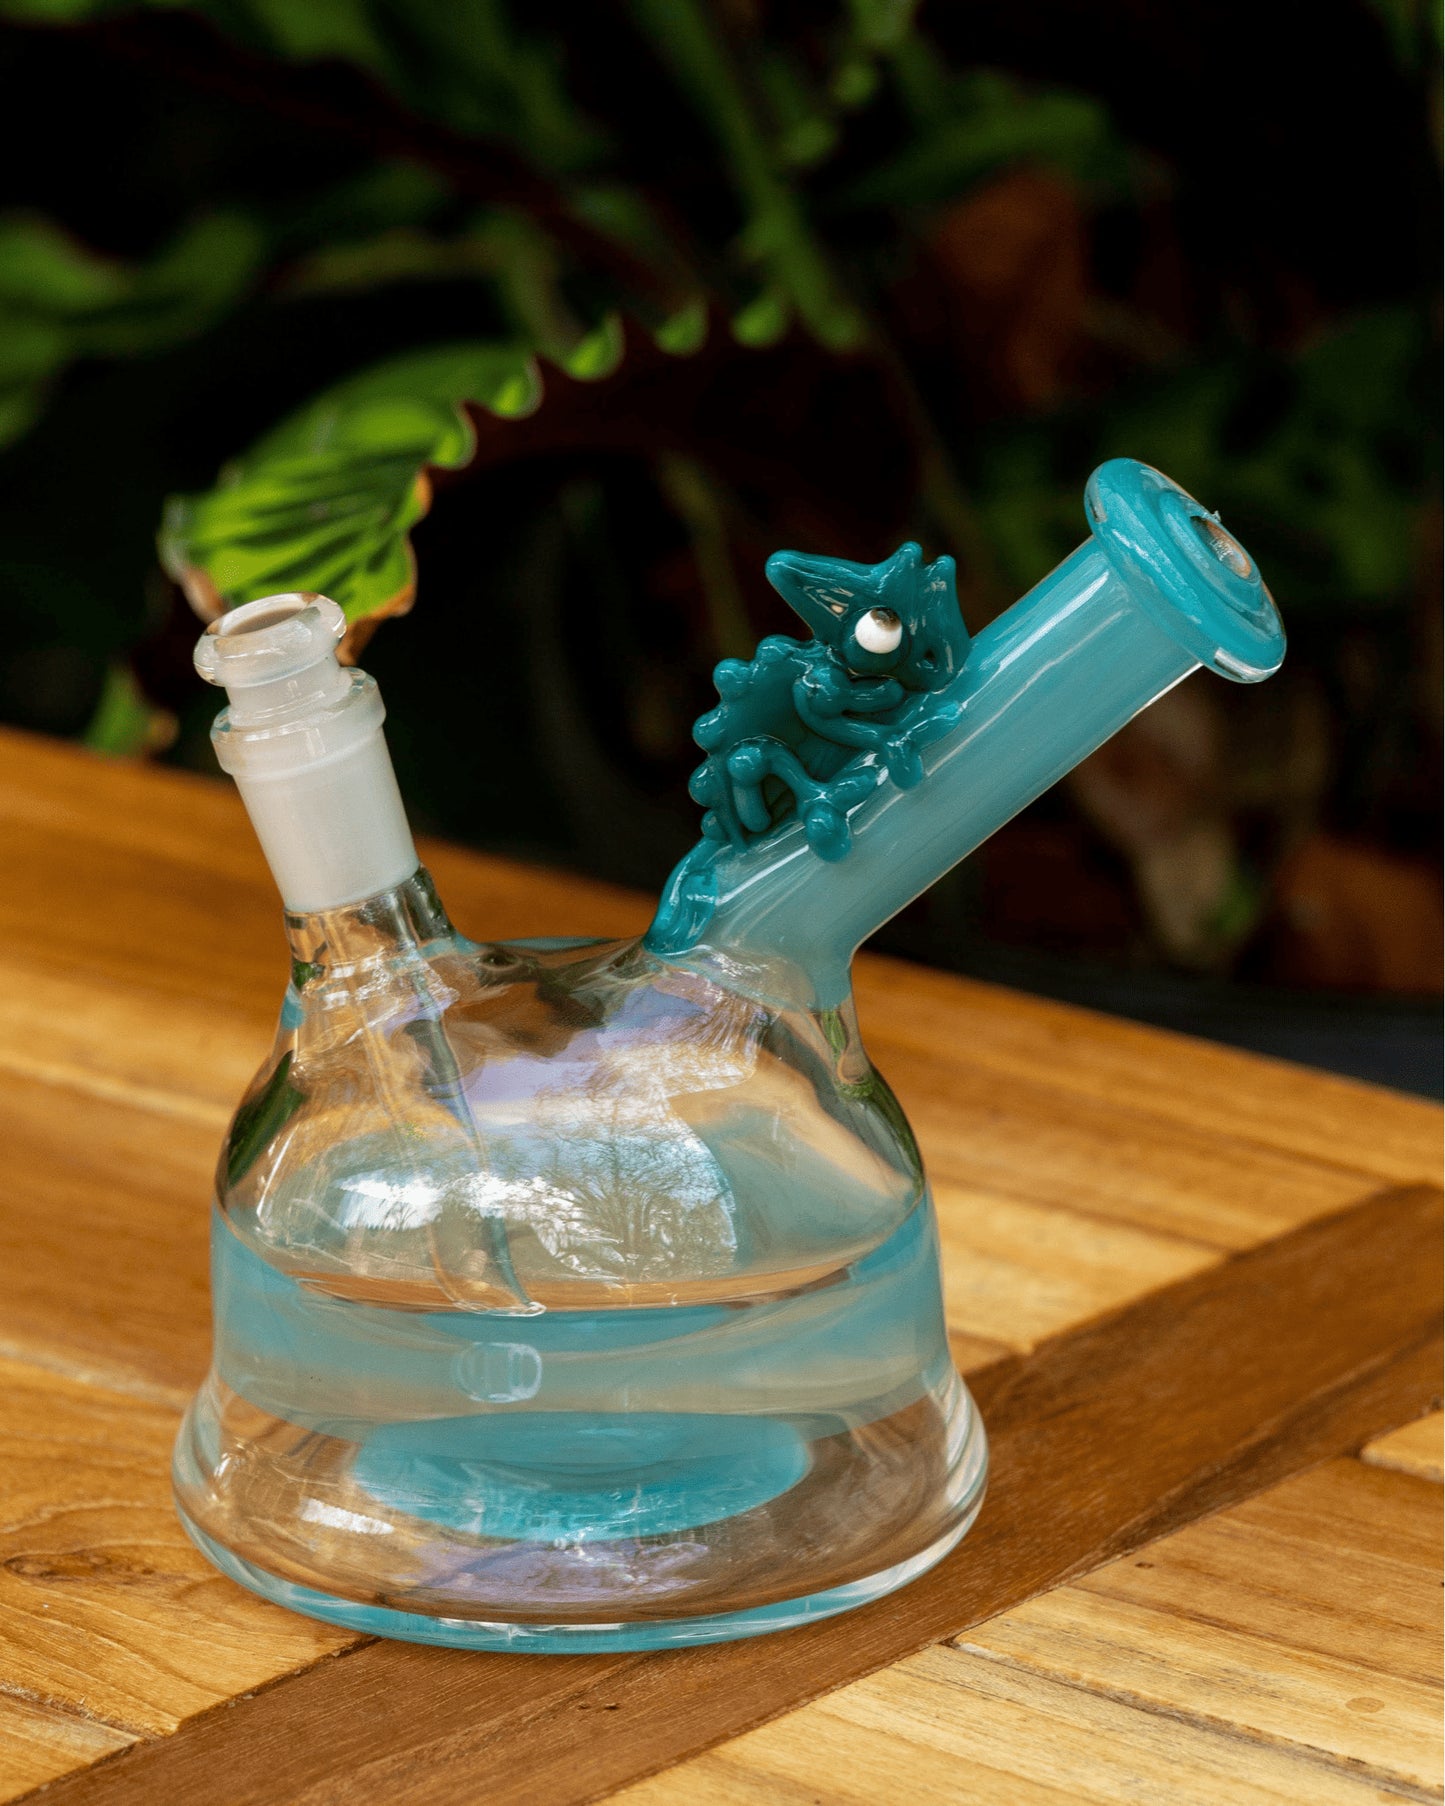 meticulously crafted design of the Light Cobalt Rig w/ Chameleon by Willy That Glass Guy